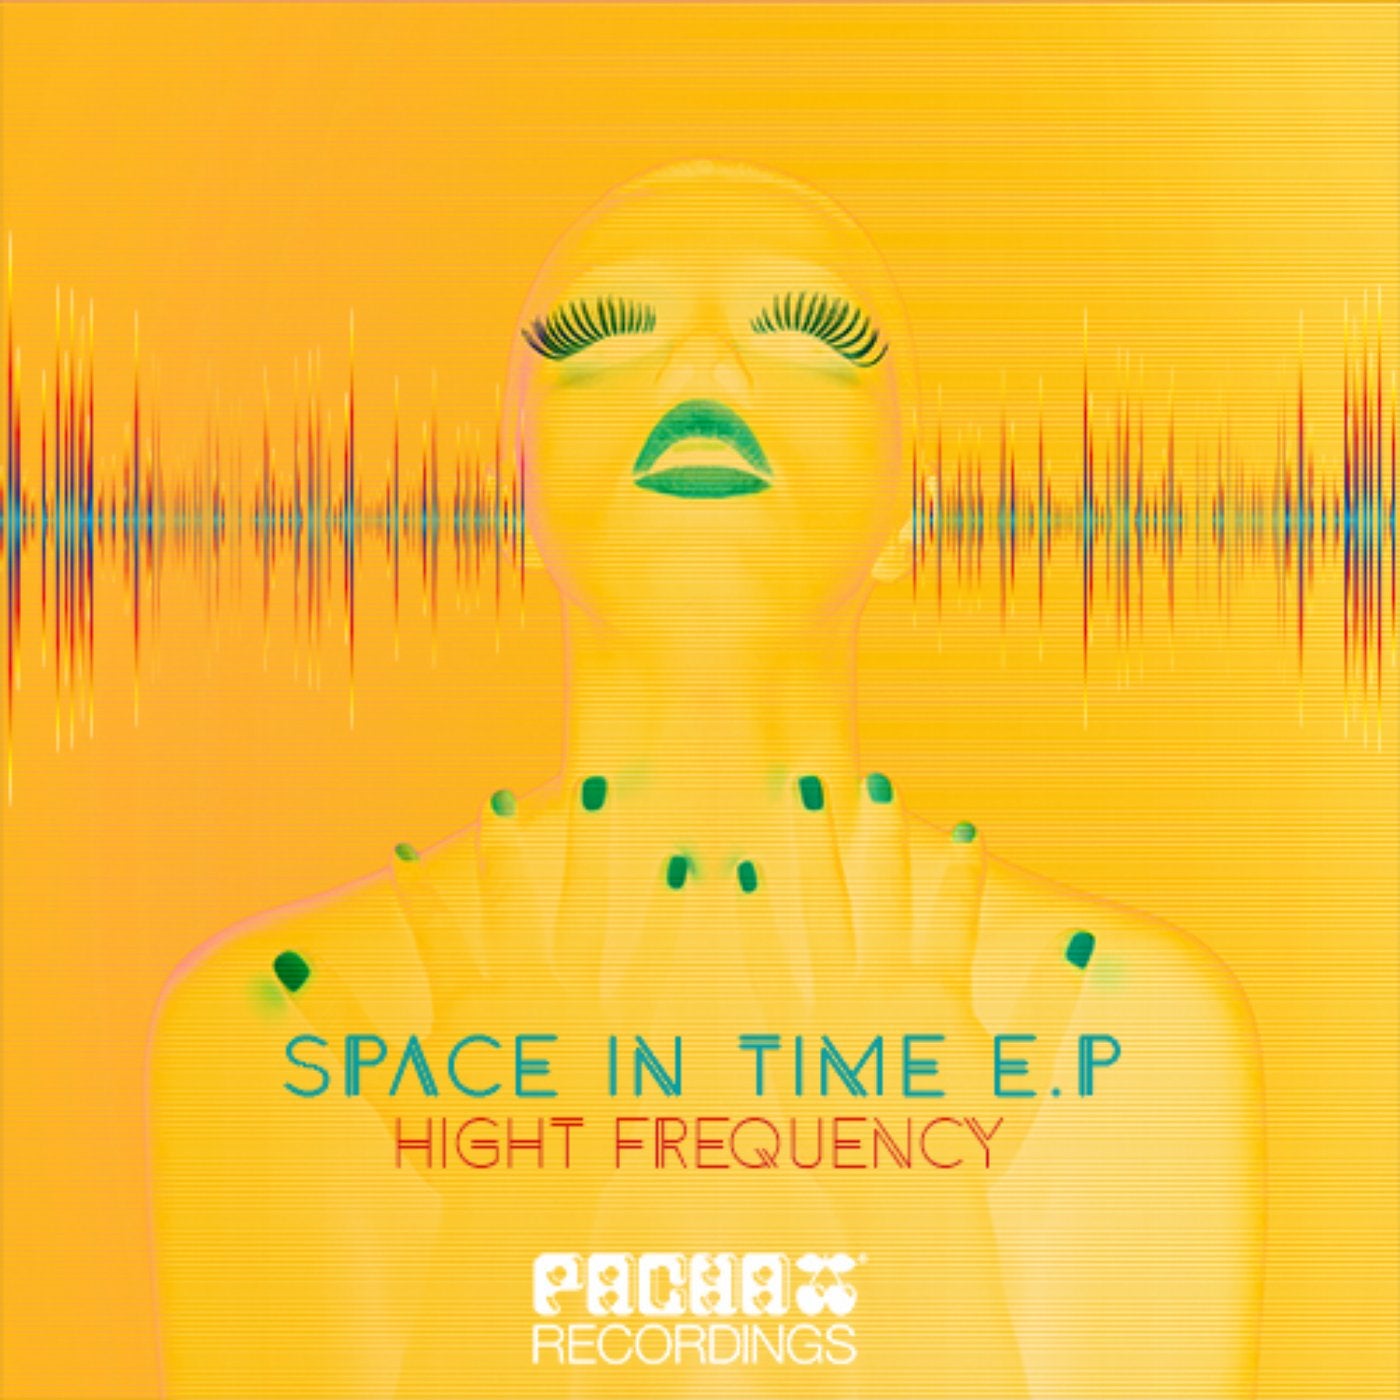 Space In Time E.P